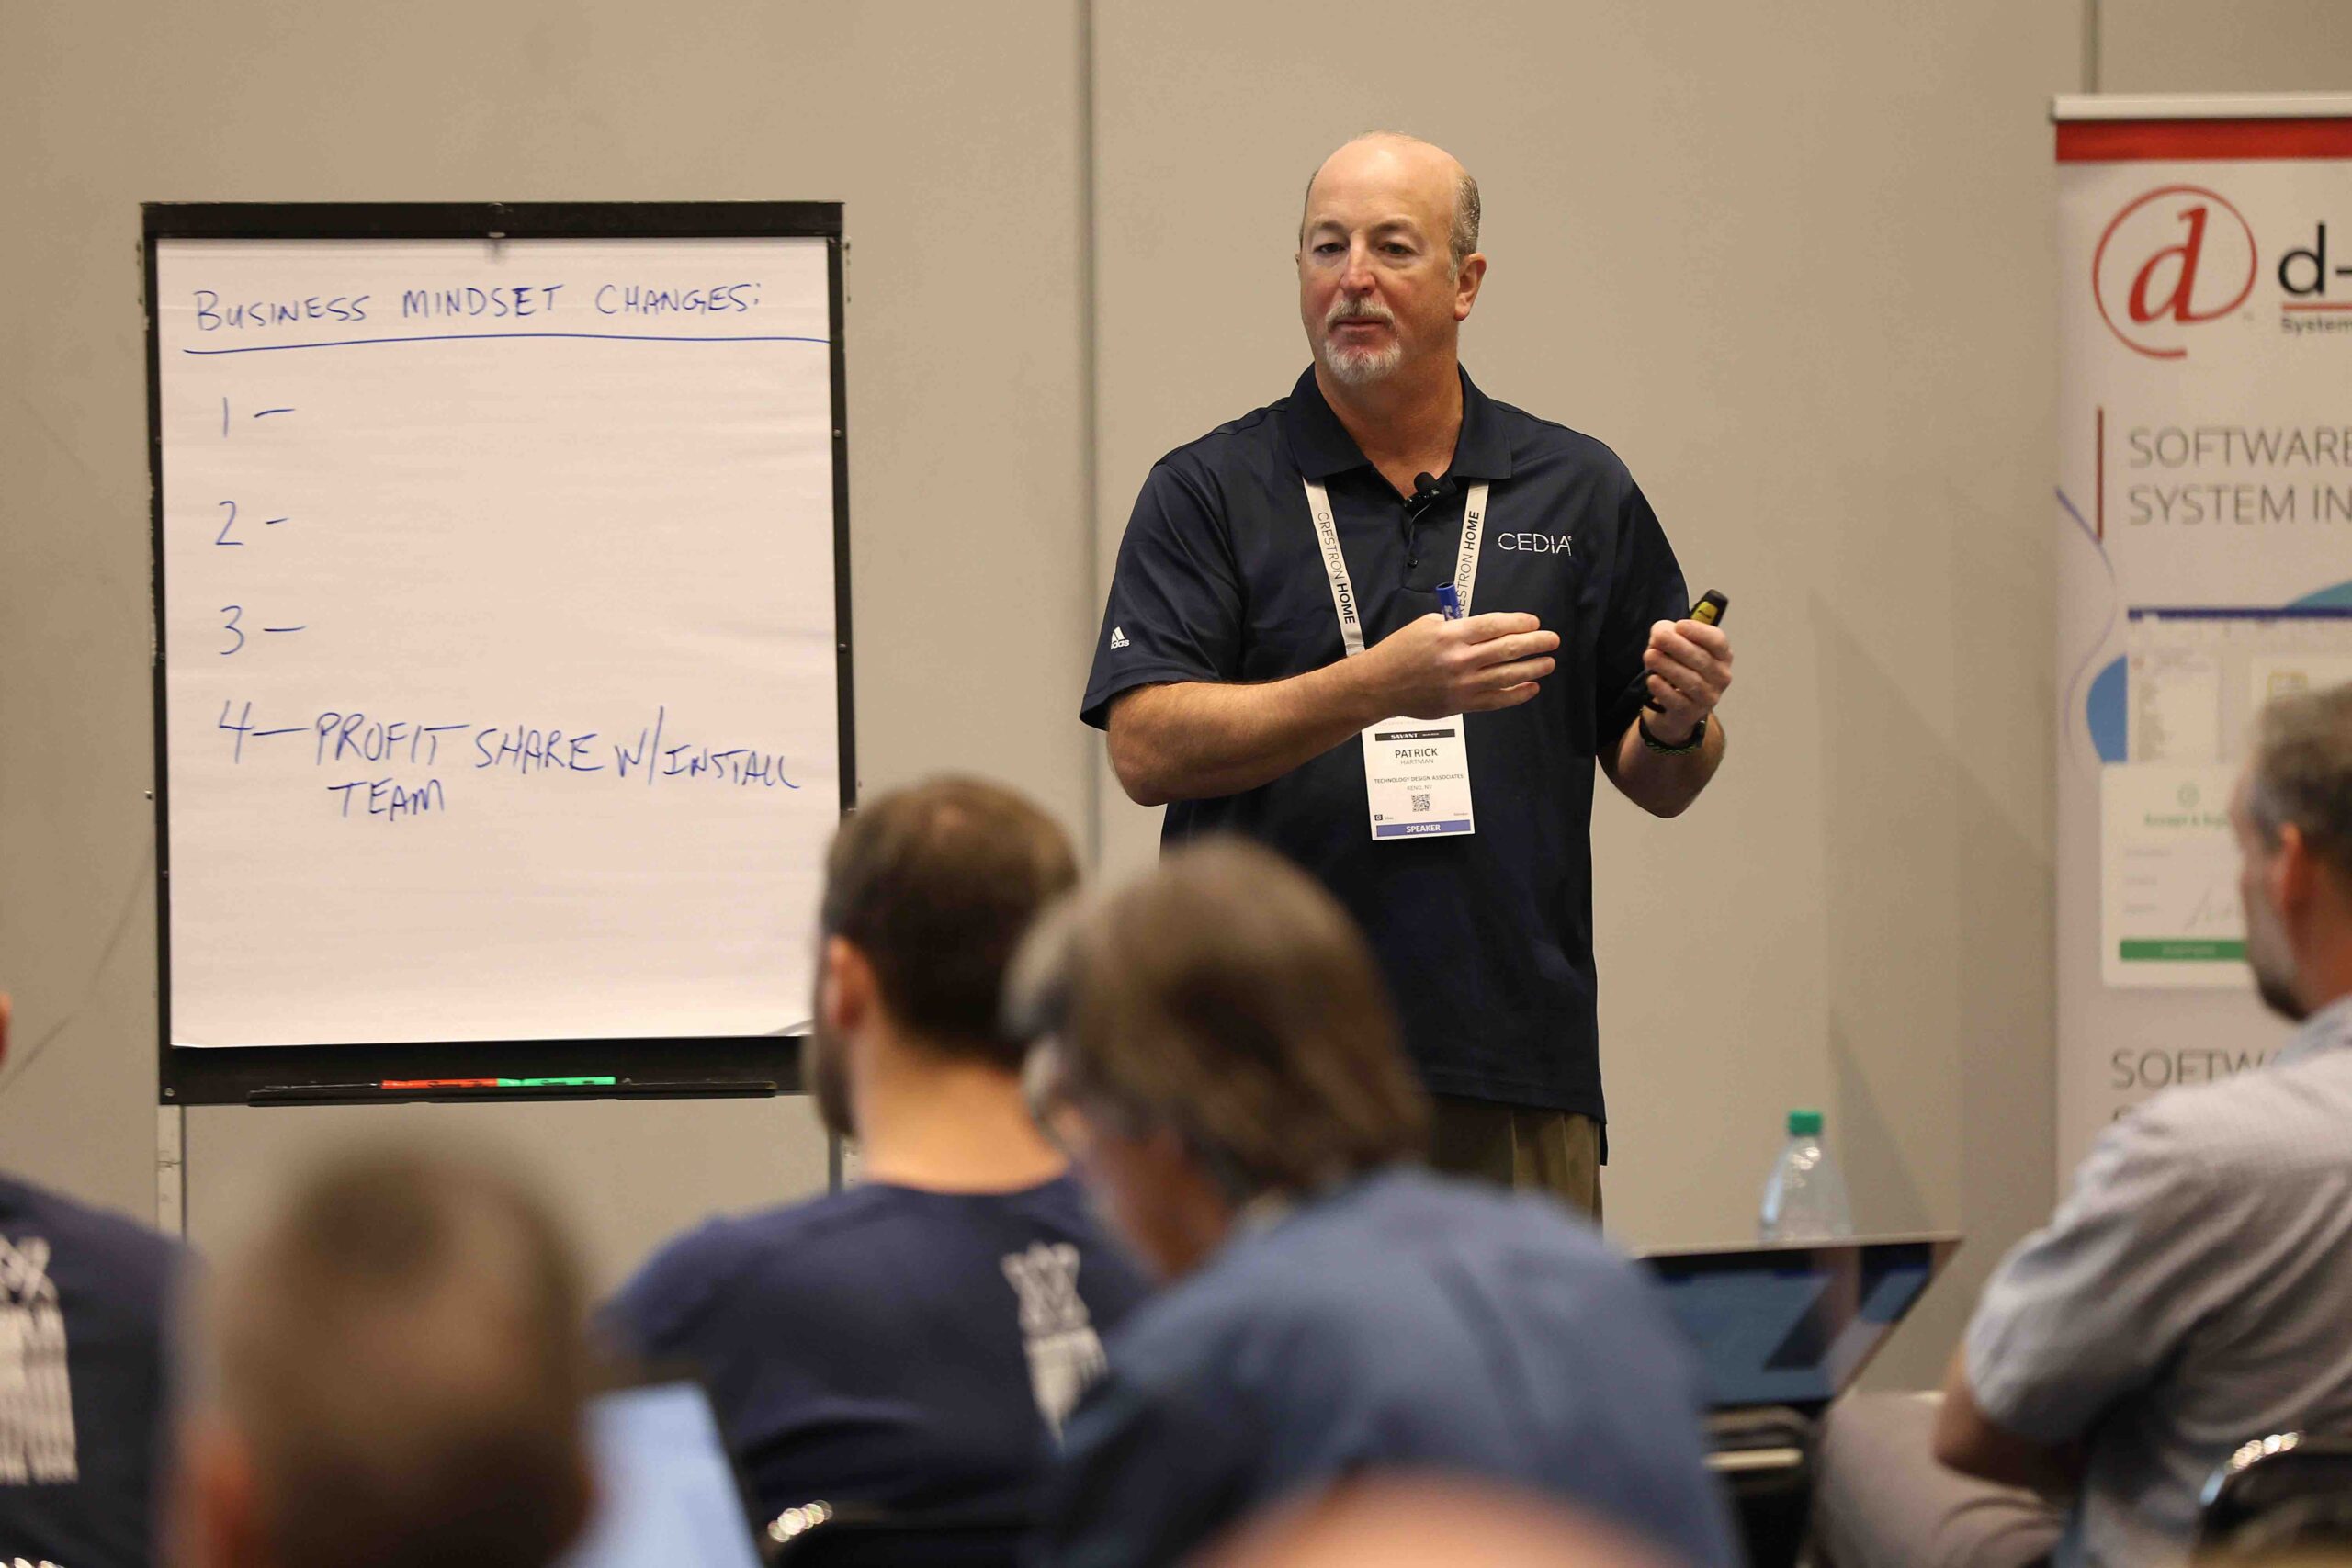 CEDIA Declares Academic Programming for Good House Expertise Convention at CEDIA Expo – rAVe [PUBS]